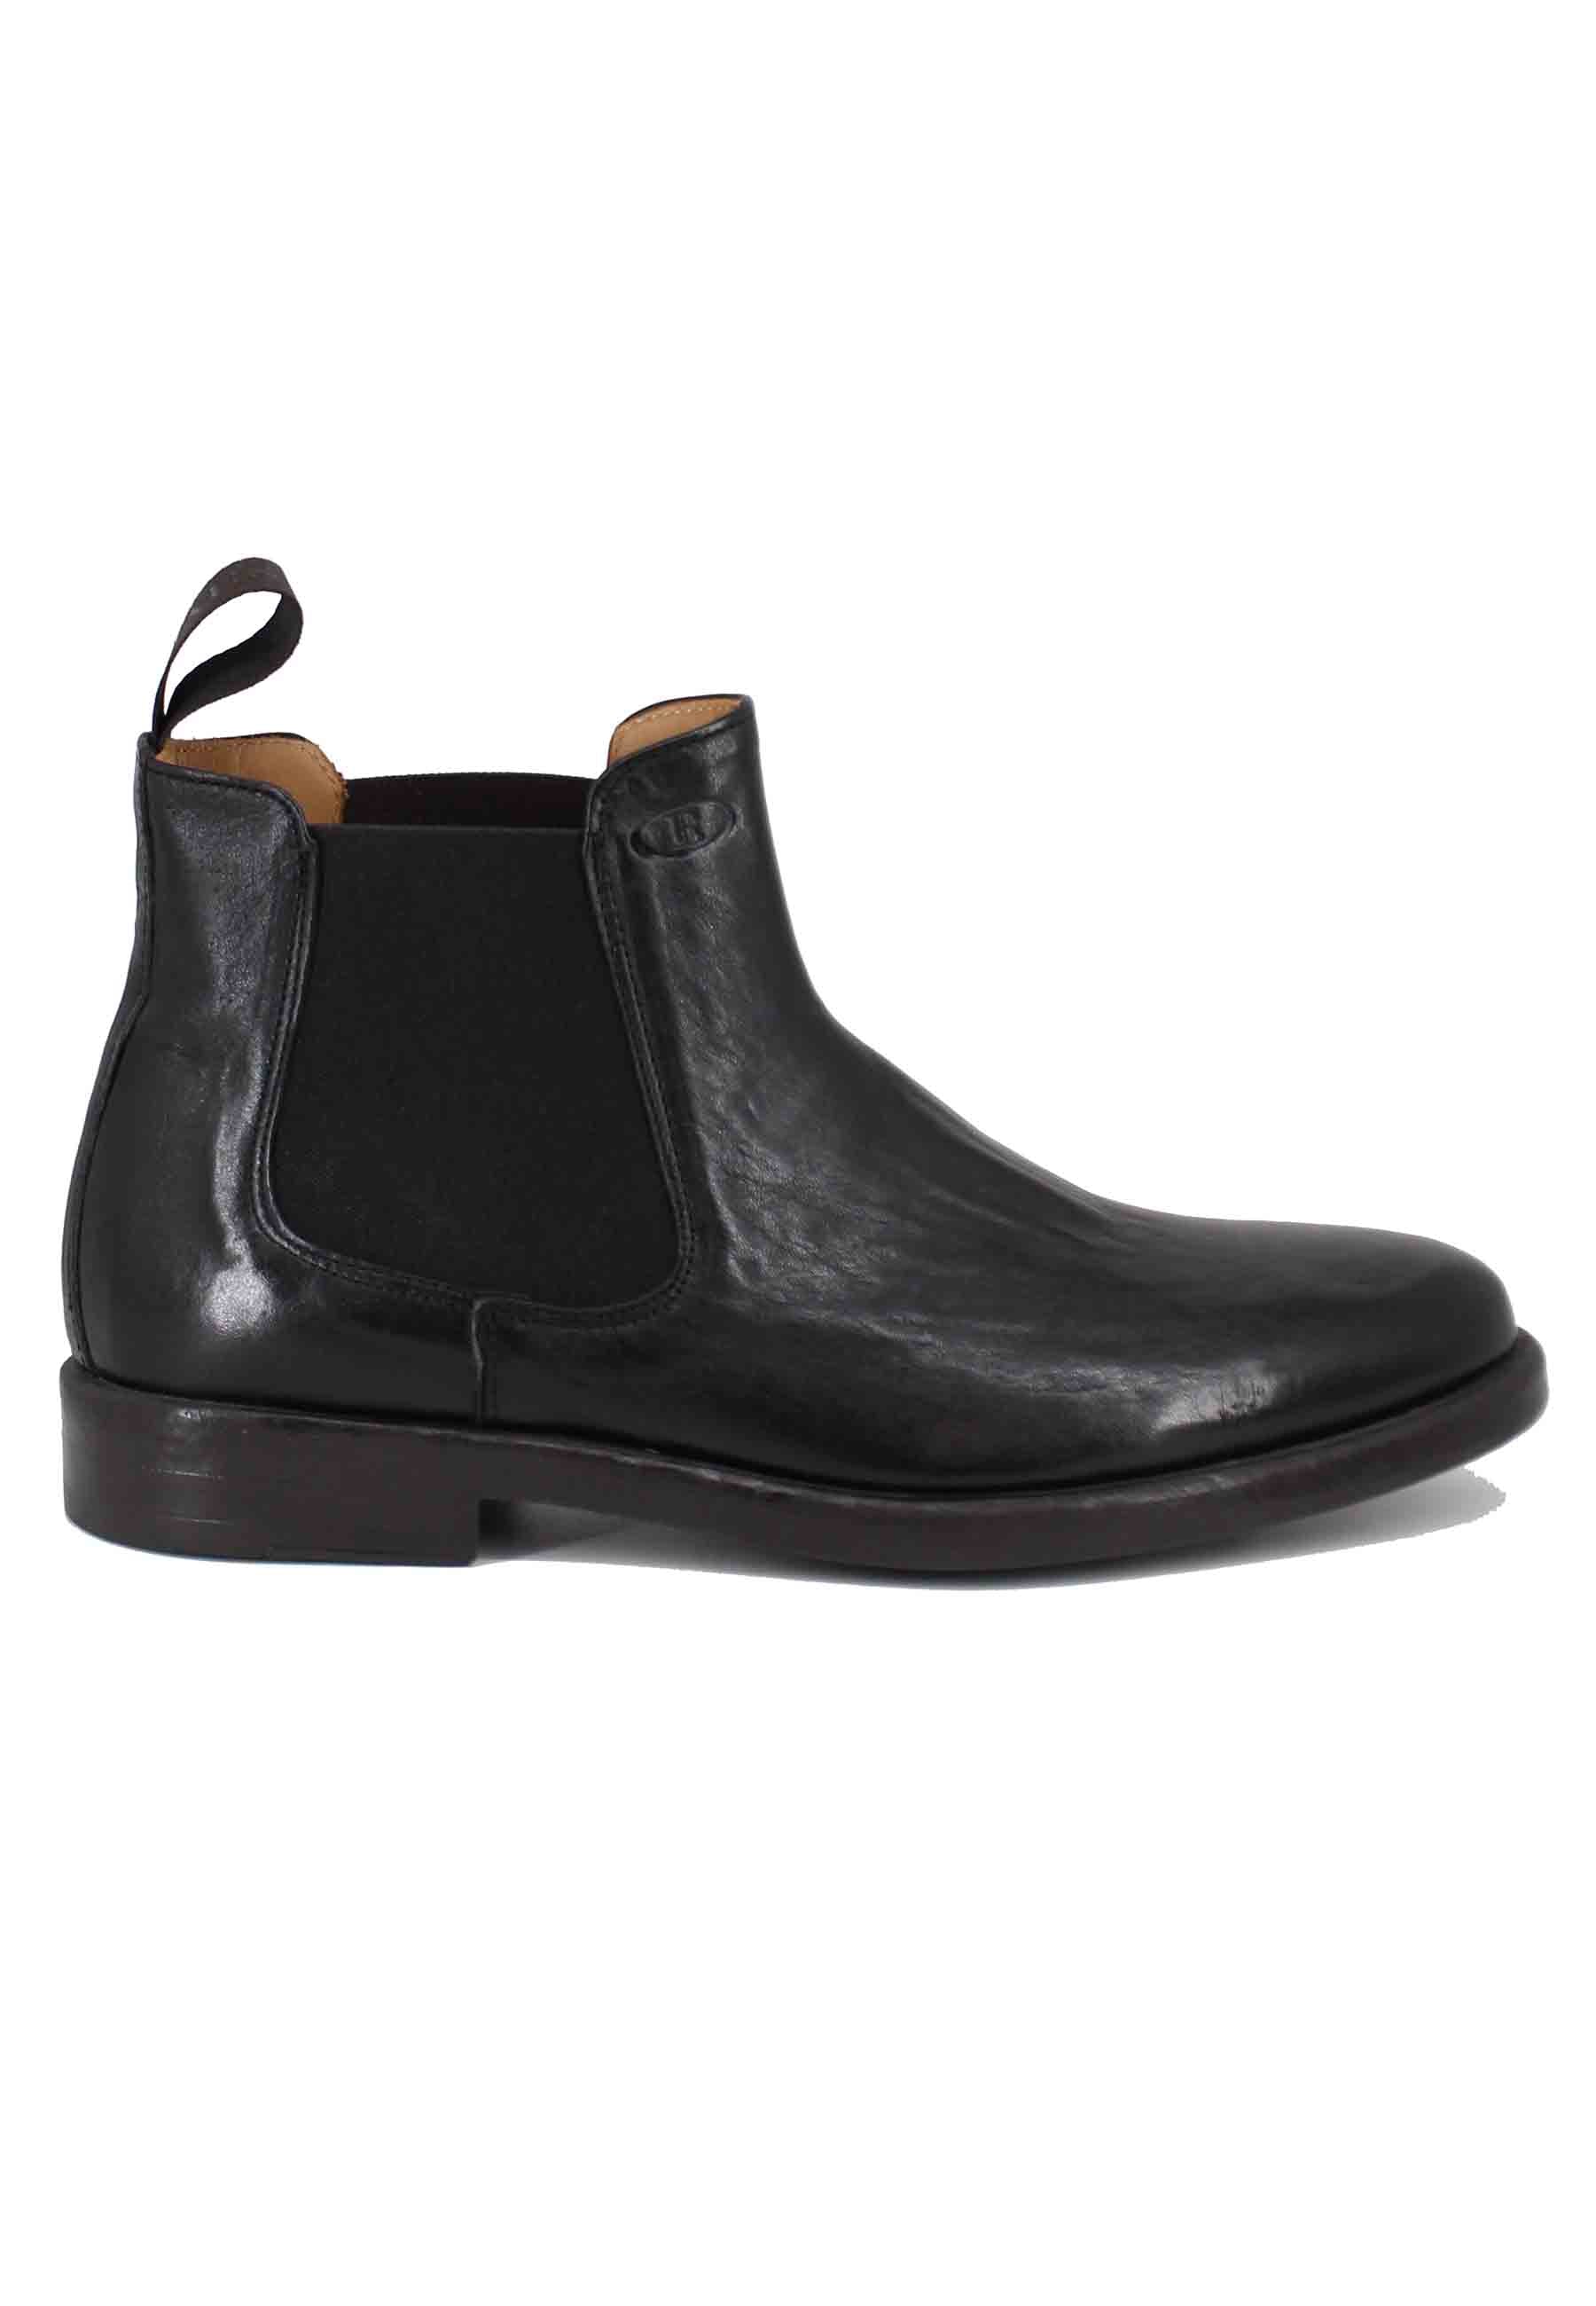 Men's Beatles ankle boots in black leather with rubber sole